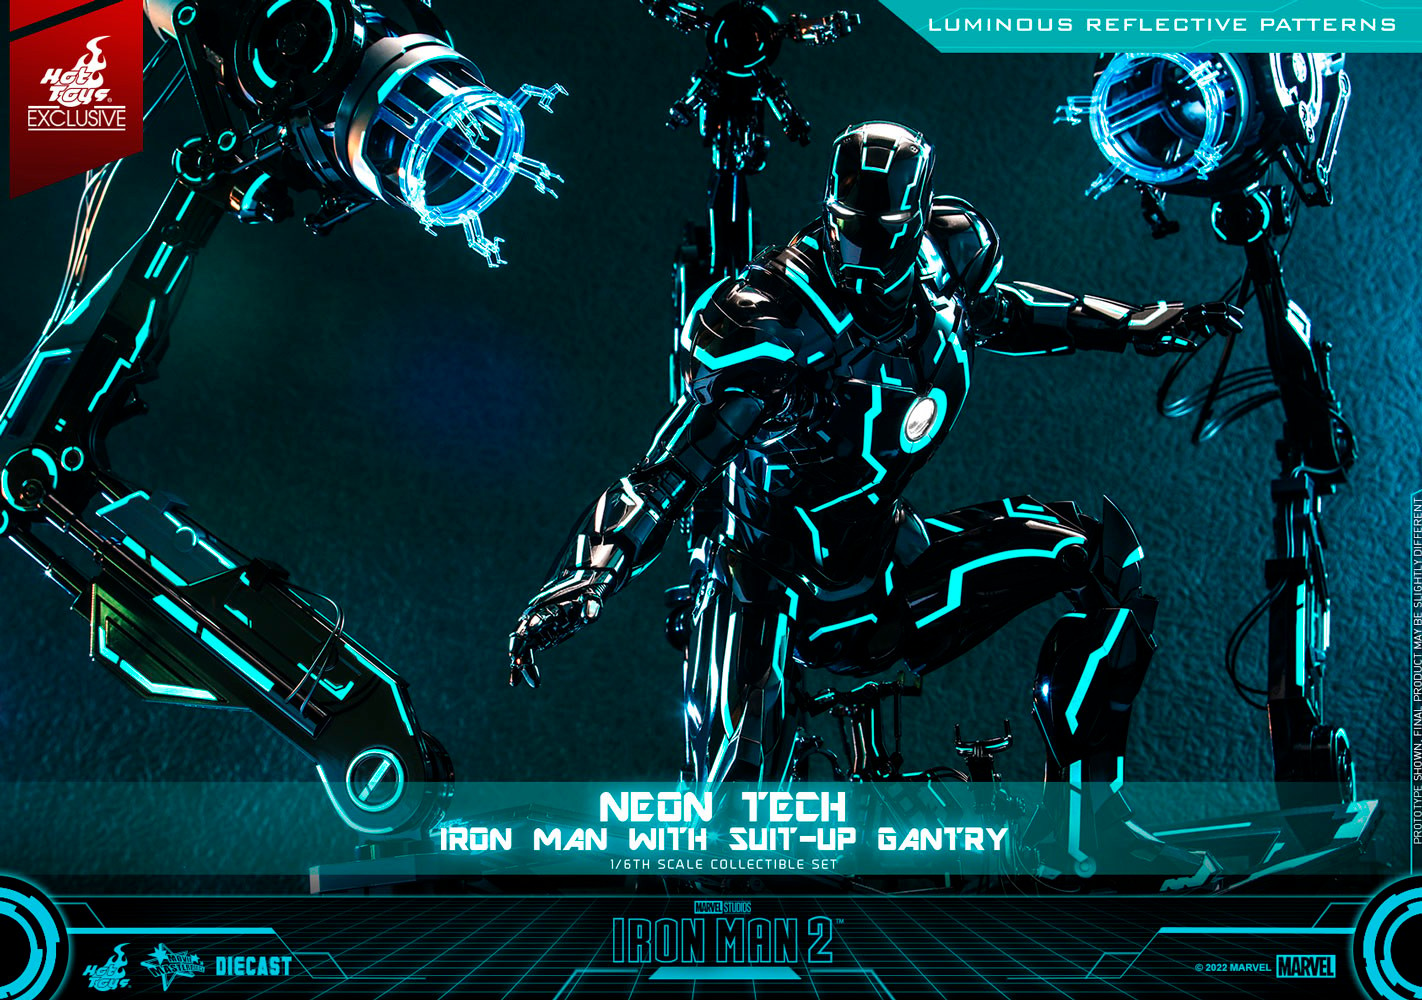 Neon Tech Iron Man with Suit-Up Gantry (Prototype Shown) View 9